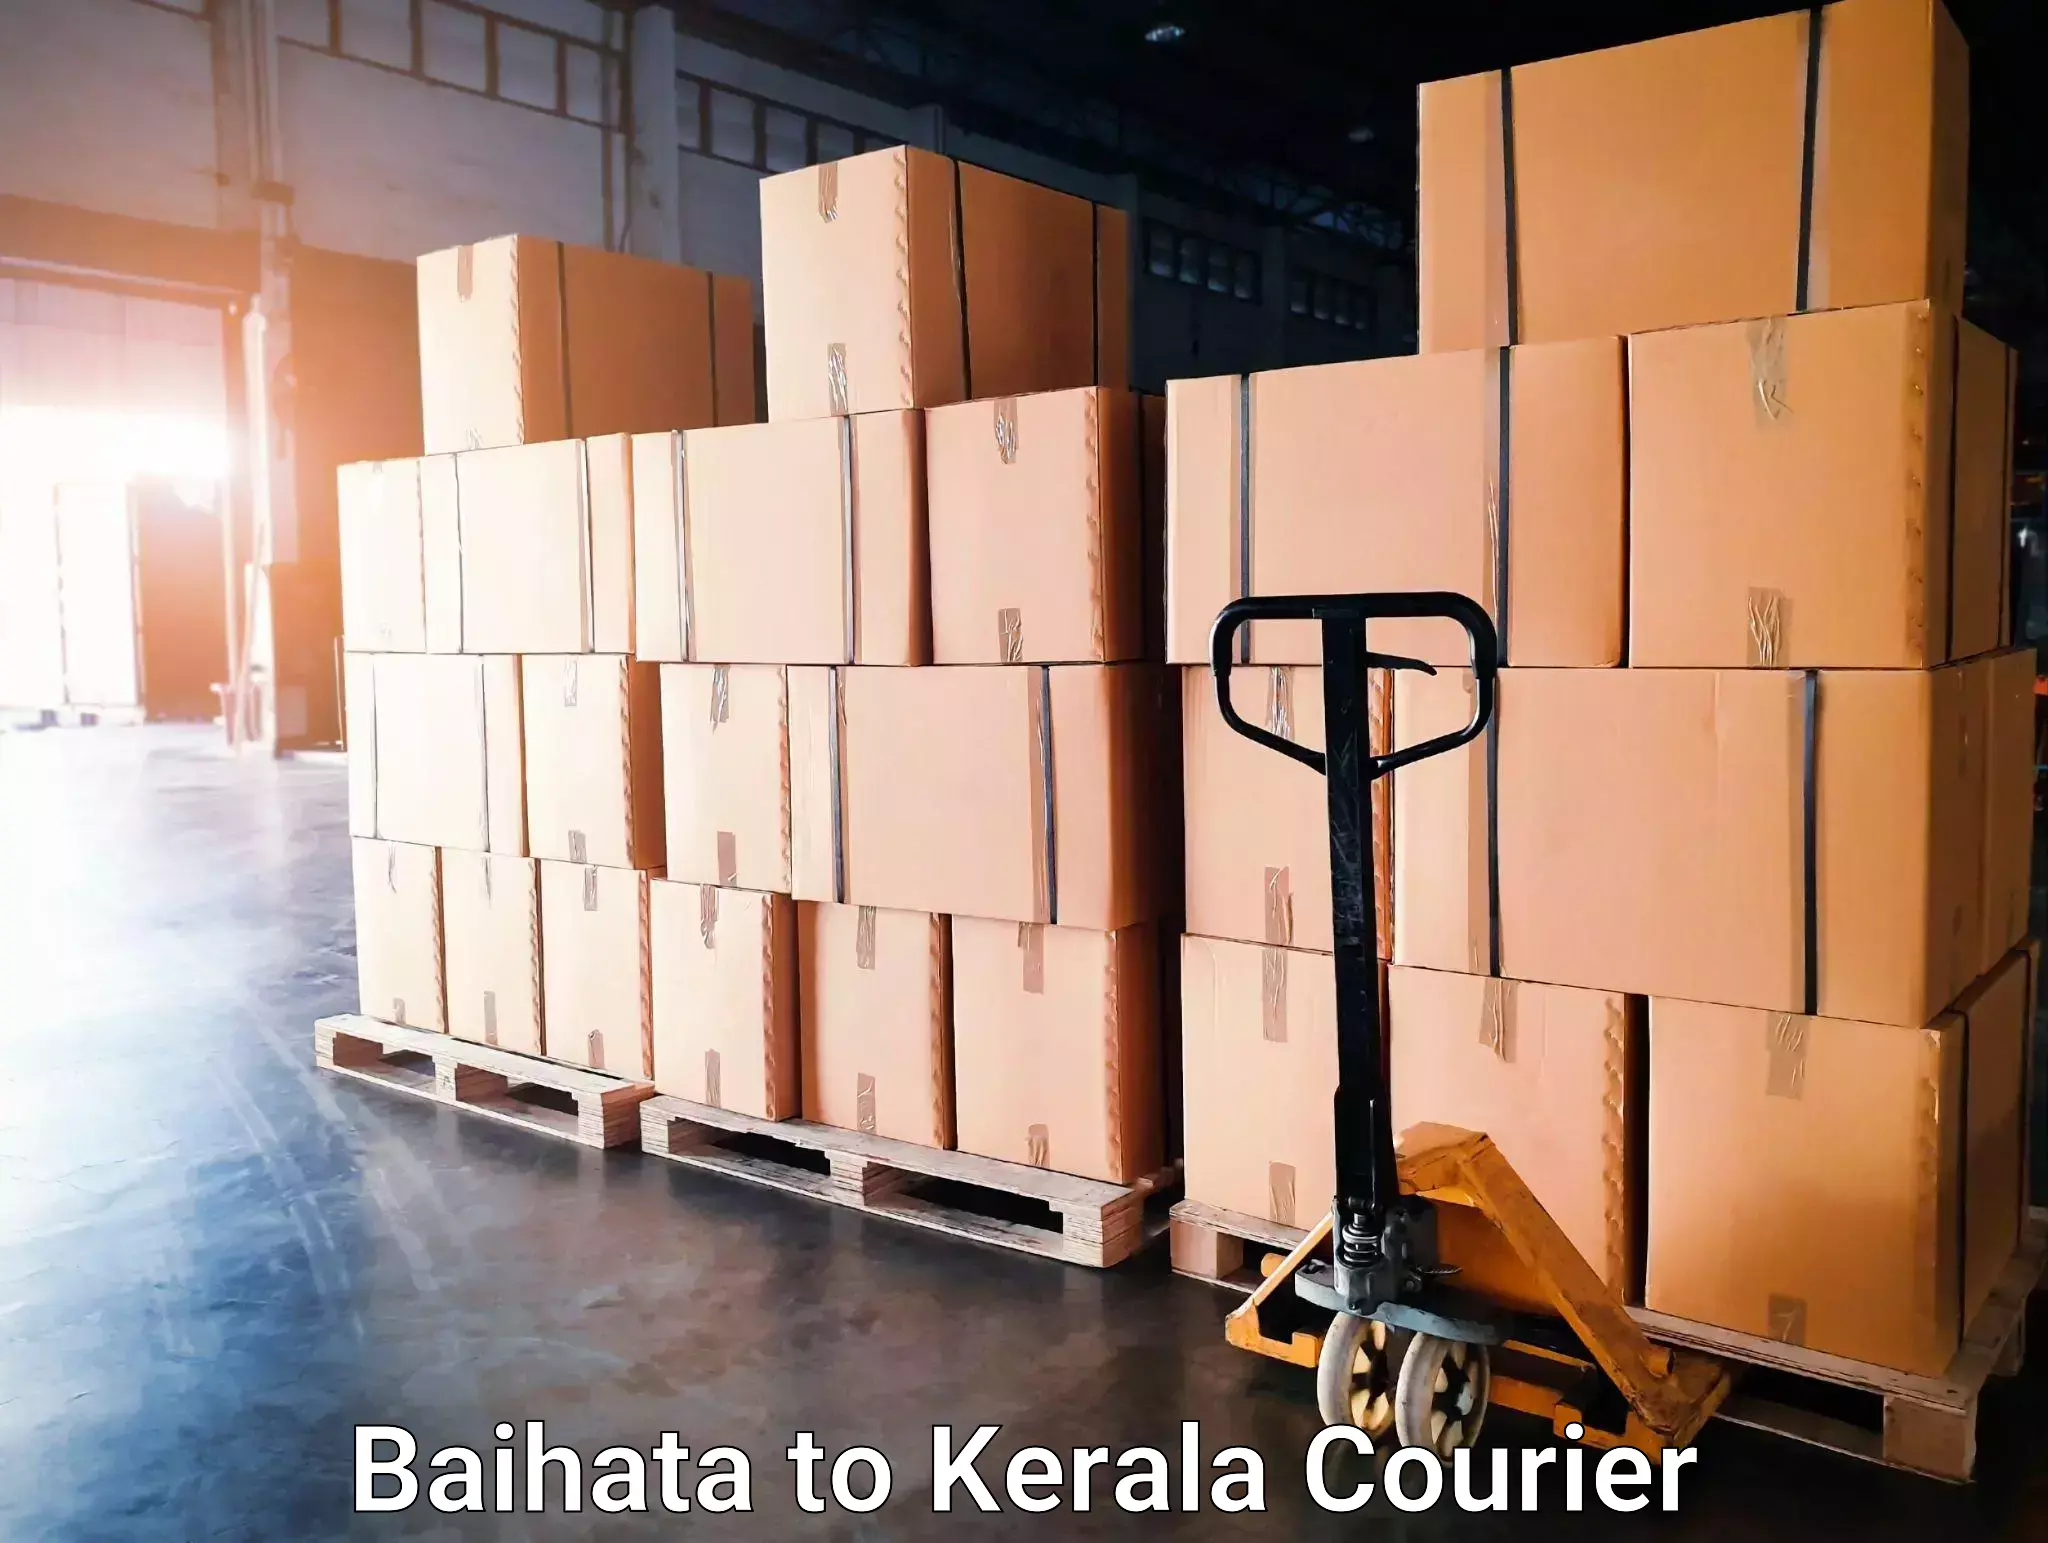 Local delivery service Baihata to Kerala